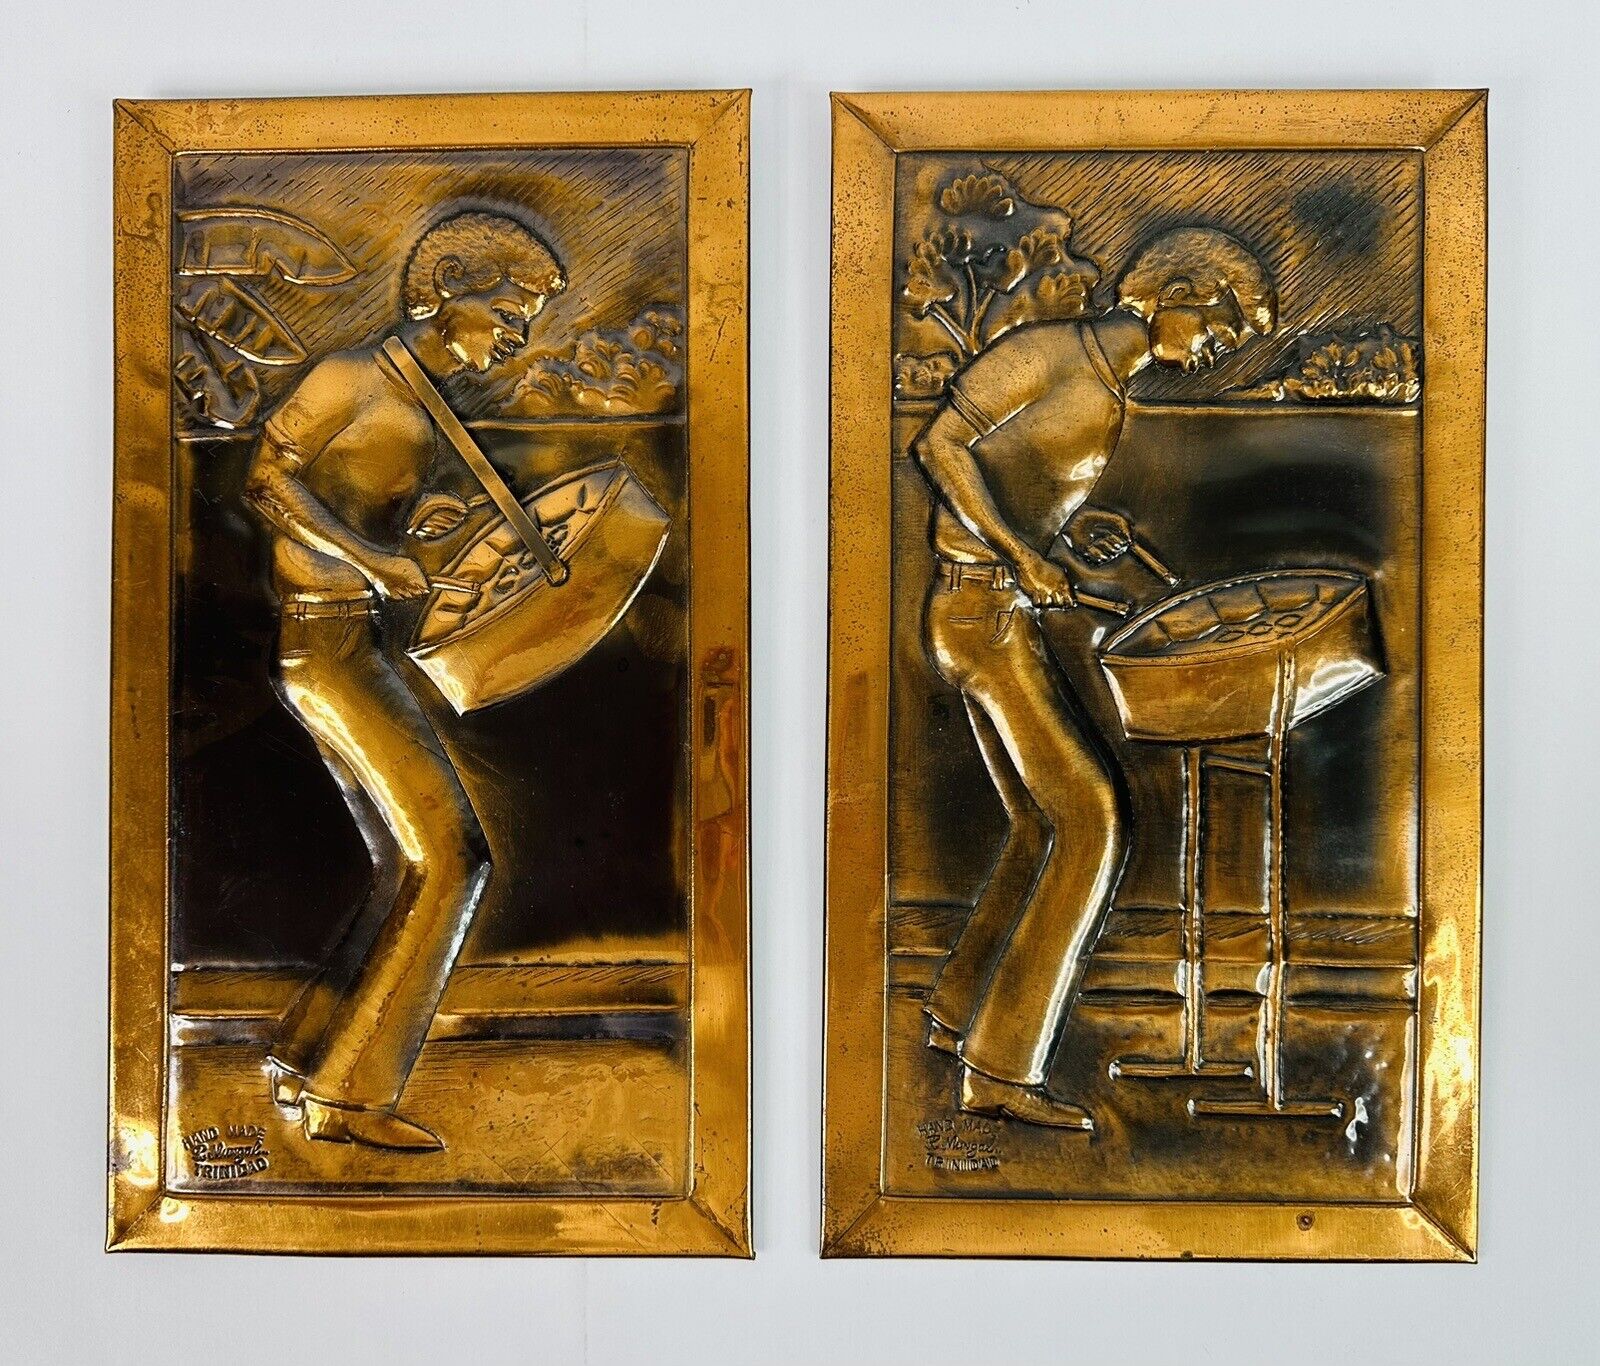 Lot Of 2 Vintage High Relief Copper Art Wall Plaques by R. Mungal Trinidad